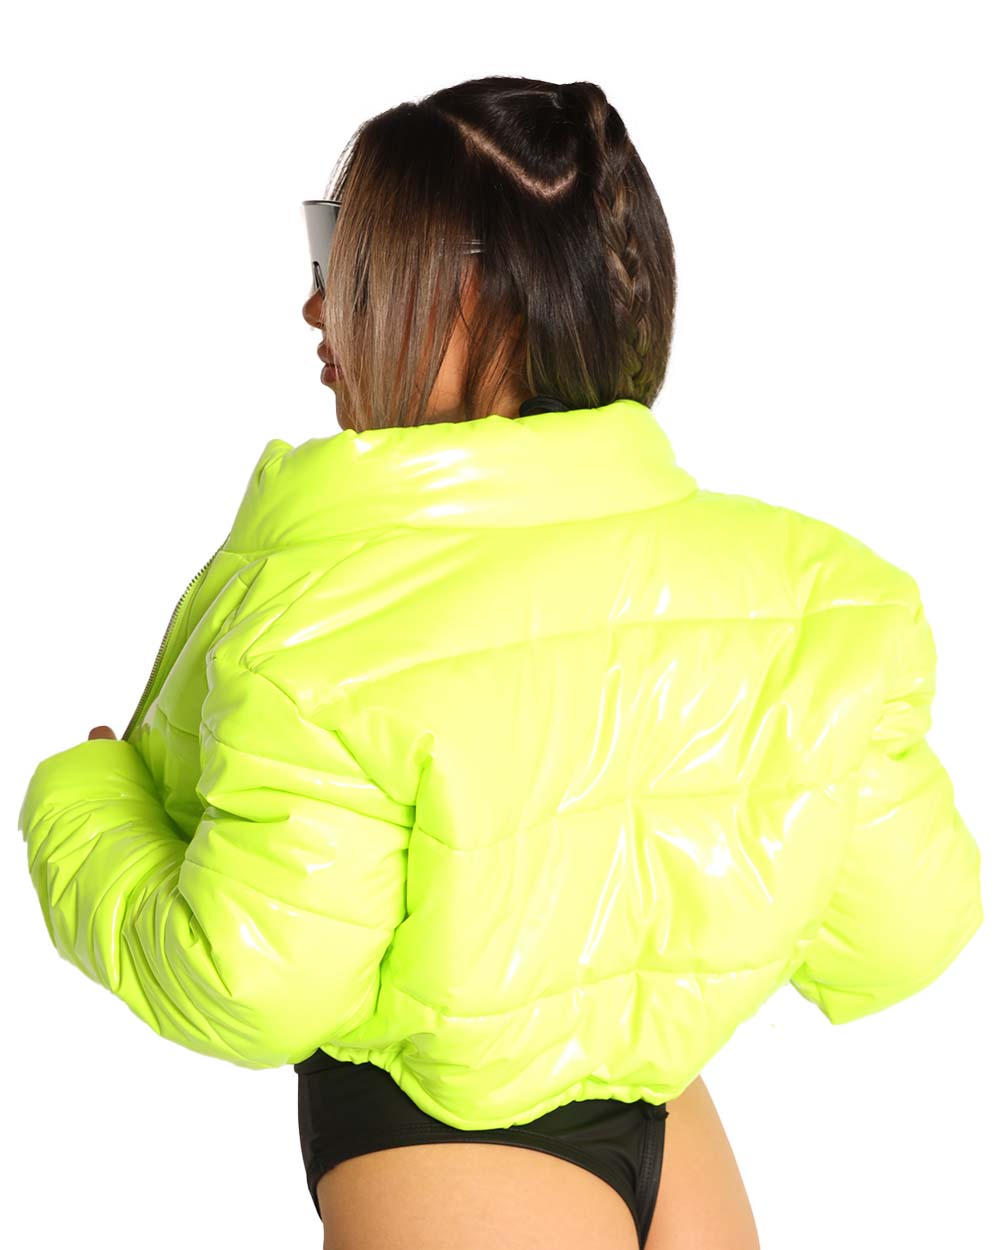 iHeartRaves Reflective Cropped Puffer Jacket Neon Yellow - S for Halloween Rave Costumes, Rave Outfits, Music Festival Clothes